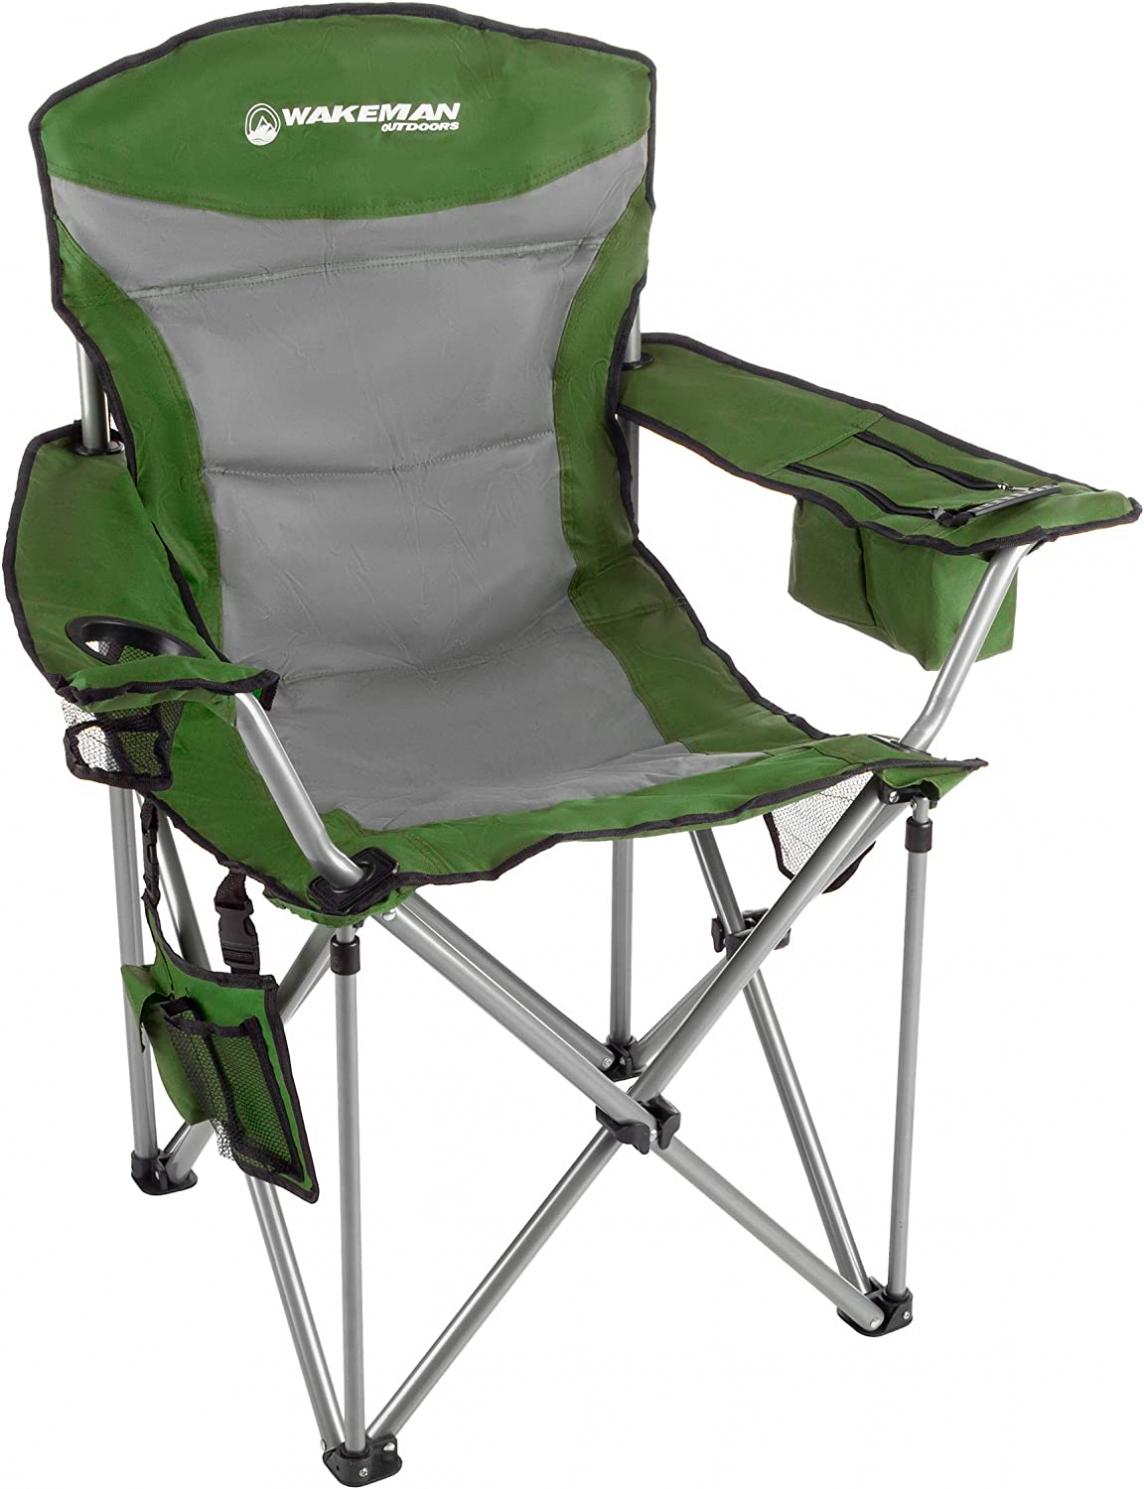 Oversized Camp Chair-300lb. Capacity Collection Big Tall Quad Seat with Cup Holder, Cooler, Carry Bag-Tailgating, Camping, Fishing by Wakeman Outdoors